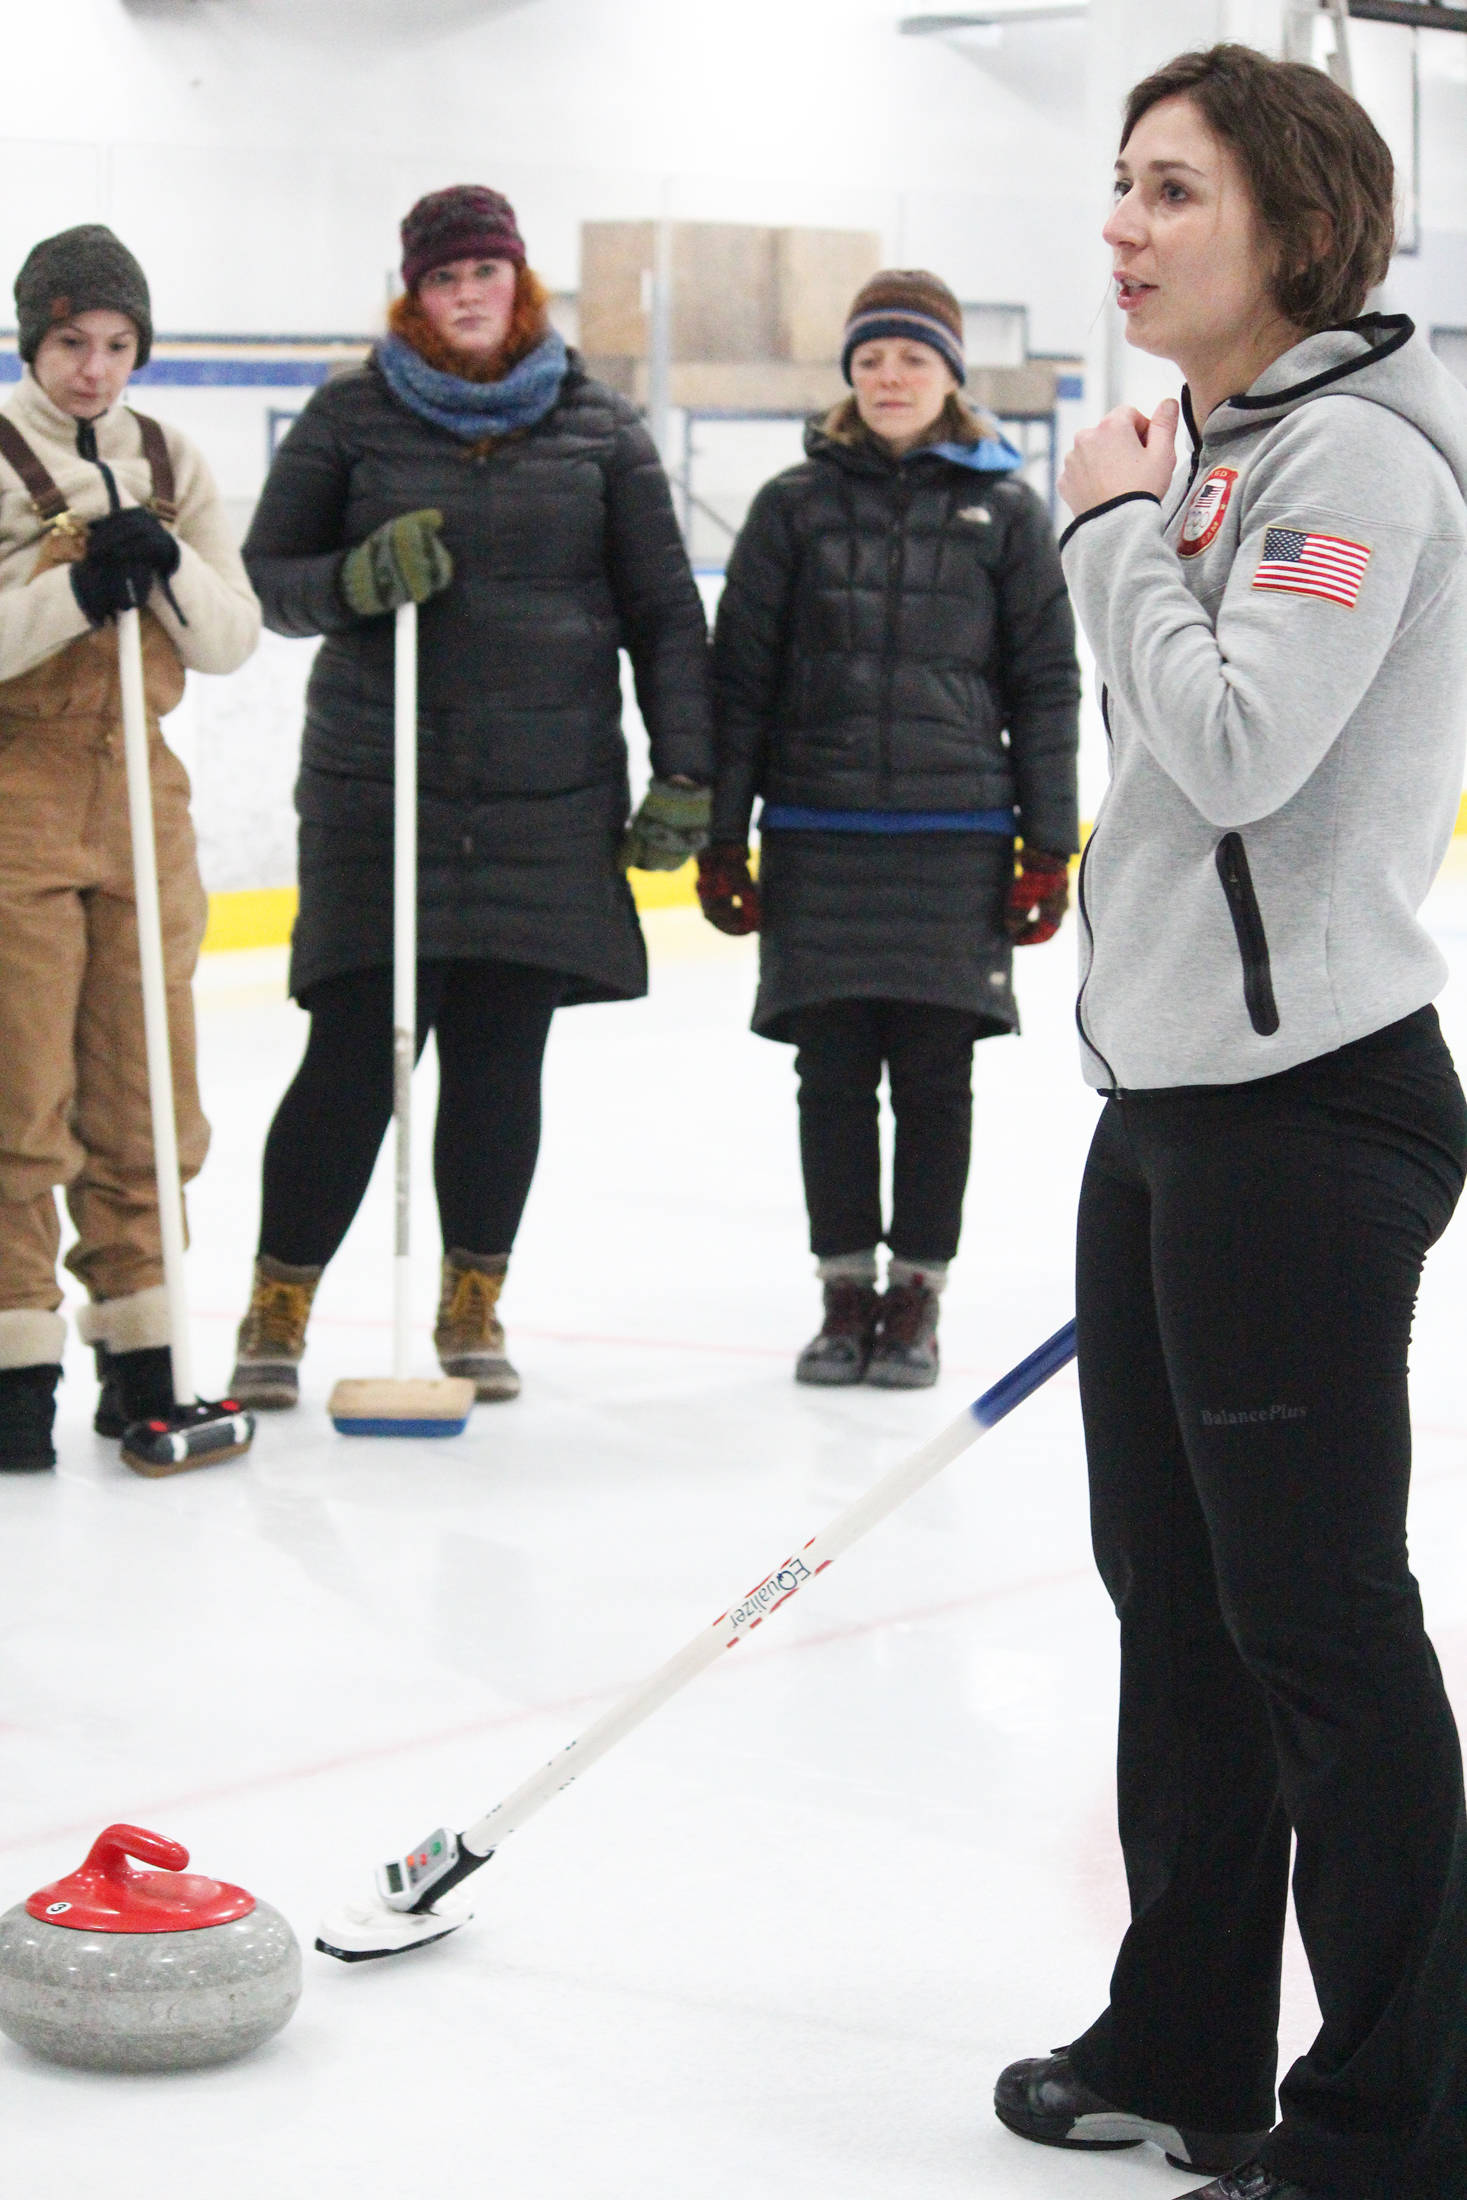 Former Olympic curler Jessica Schultz explains the basics of the sport to a group of people Saturday, Jan. 12, 2019 at the Kevin Bell Ice Arena in Homer, Alaska during a fundraiser event for the Homer Curling Club. (Photo by Megan Pacer/Homer News)